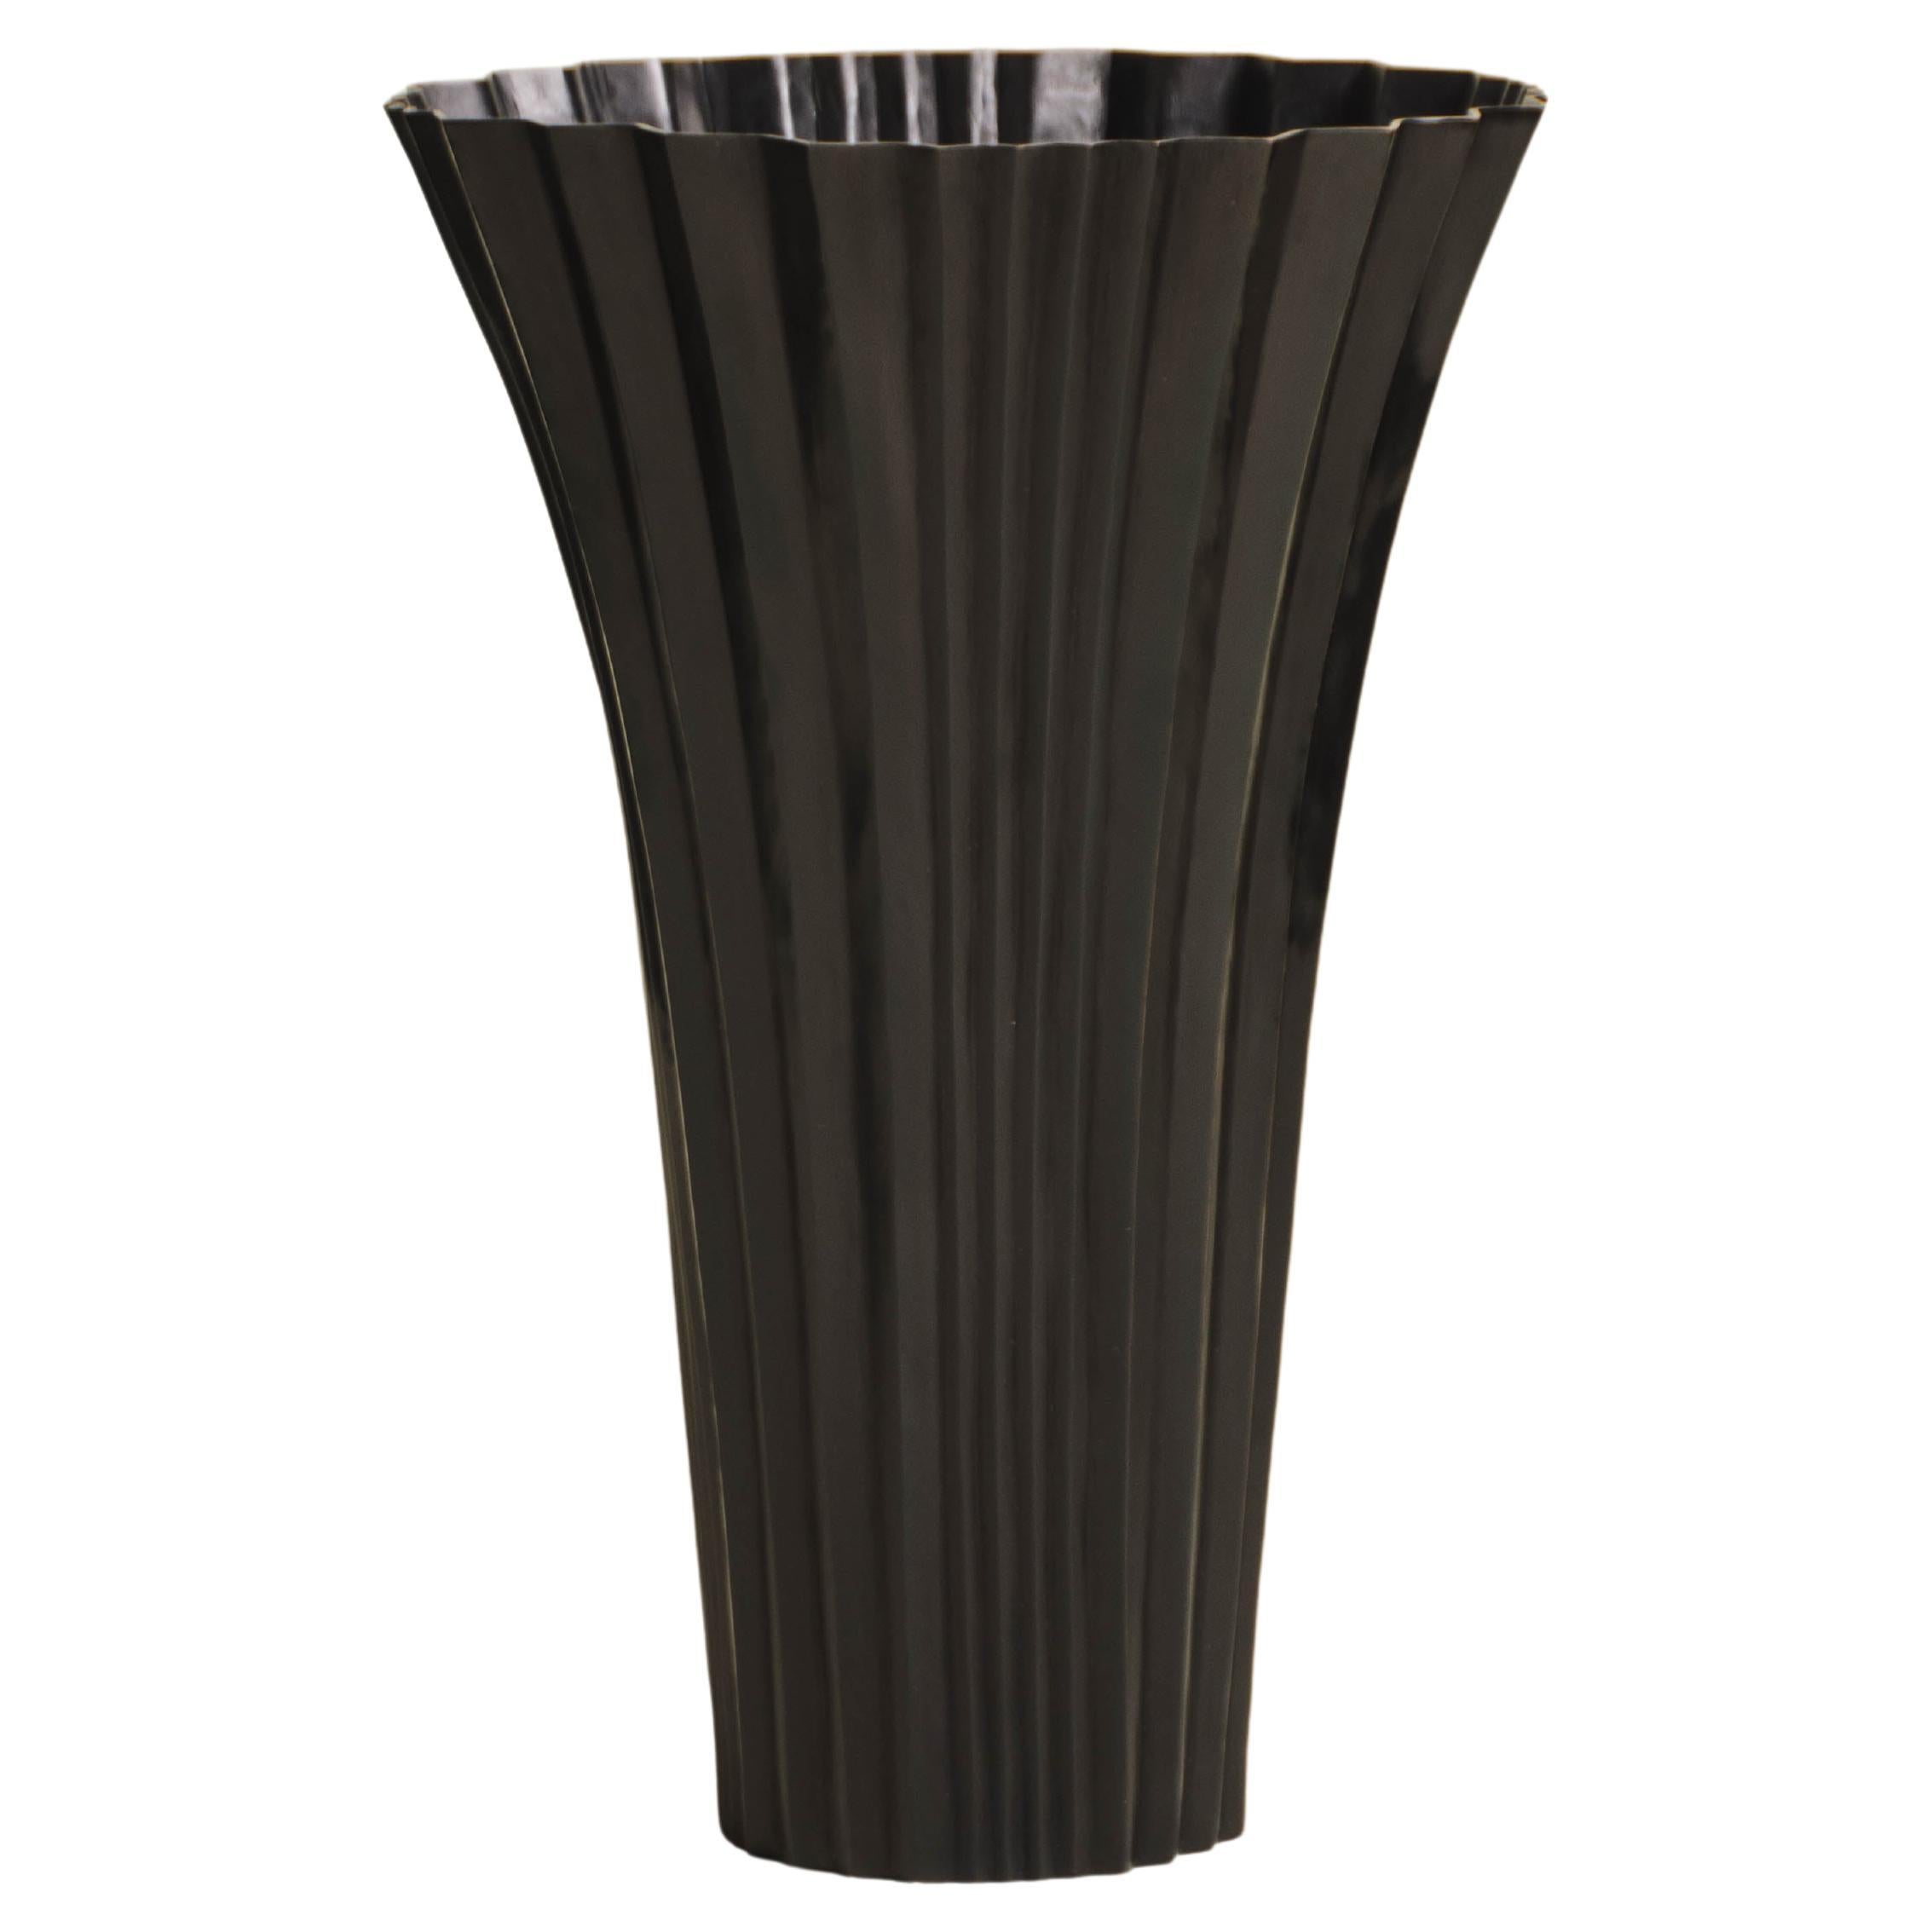 Contemporary Repousse Fan Design Vase in Black Copper by Robert Kuo, Limited